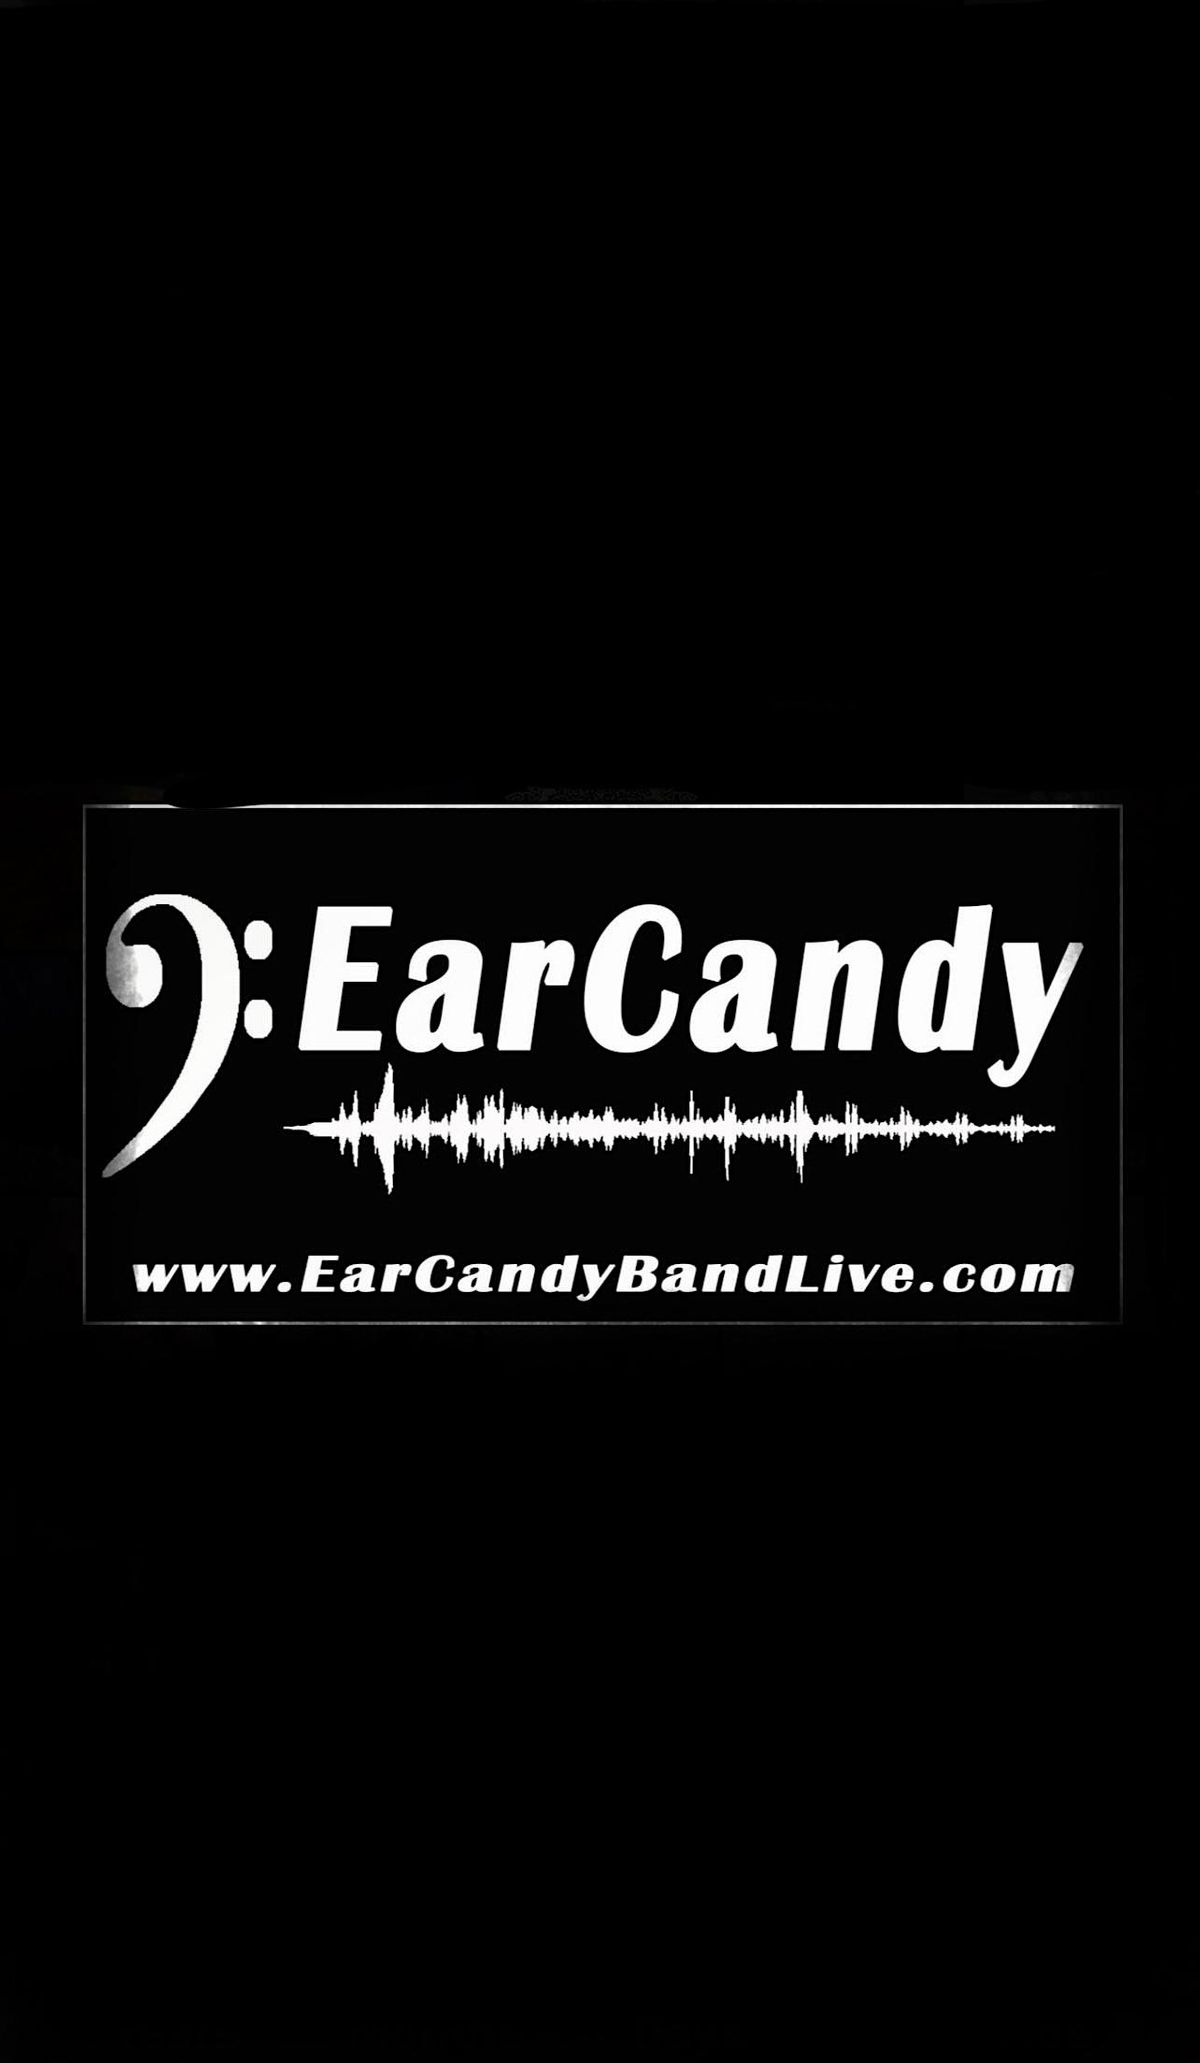 Live music by Ear Candy!